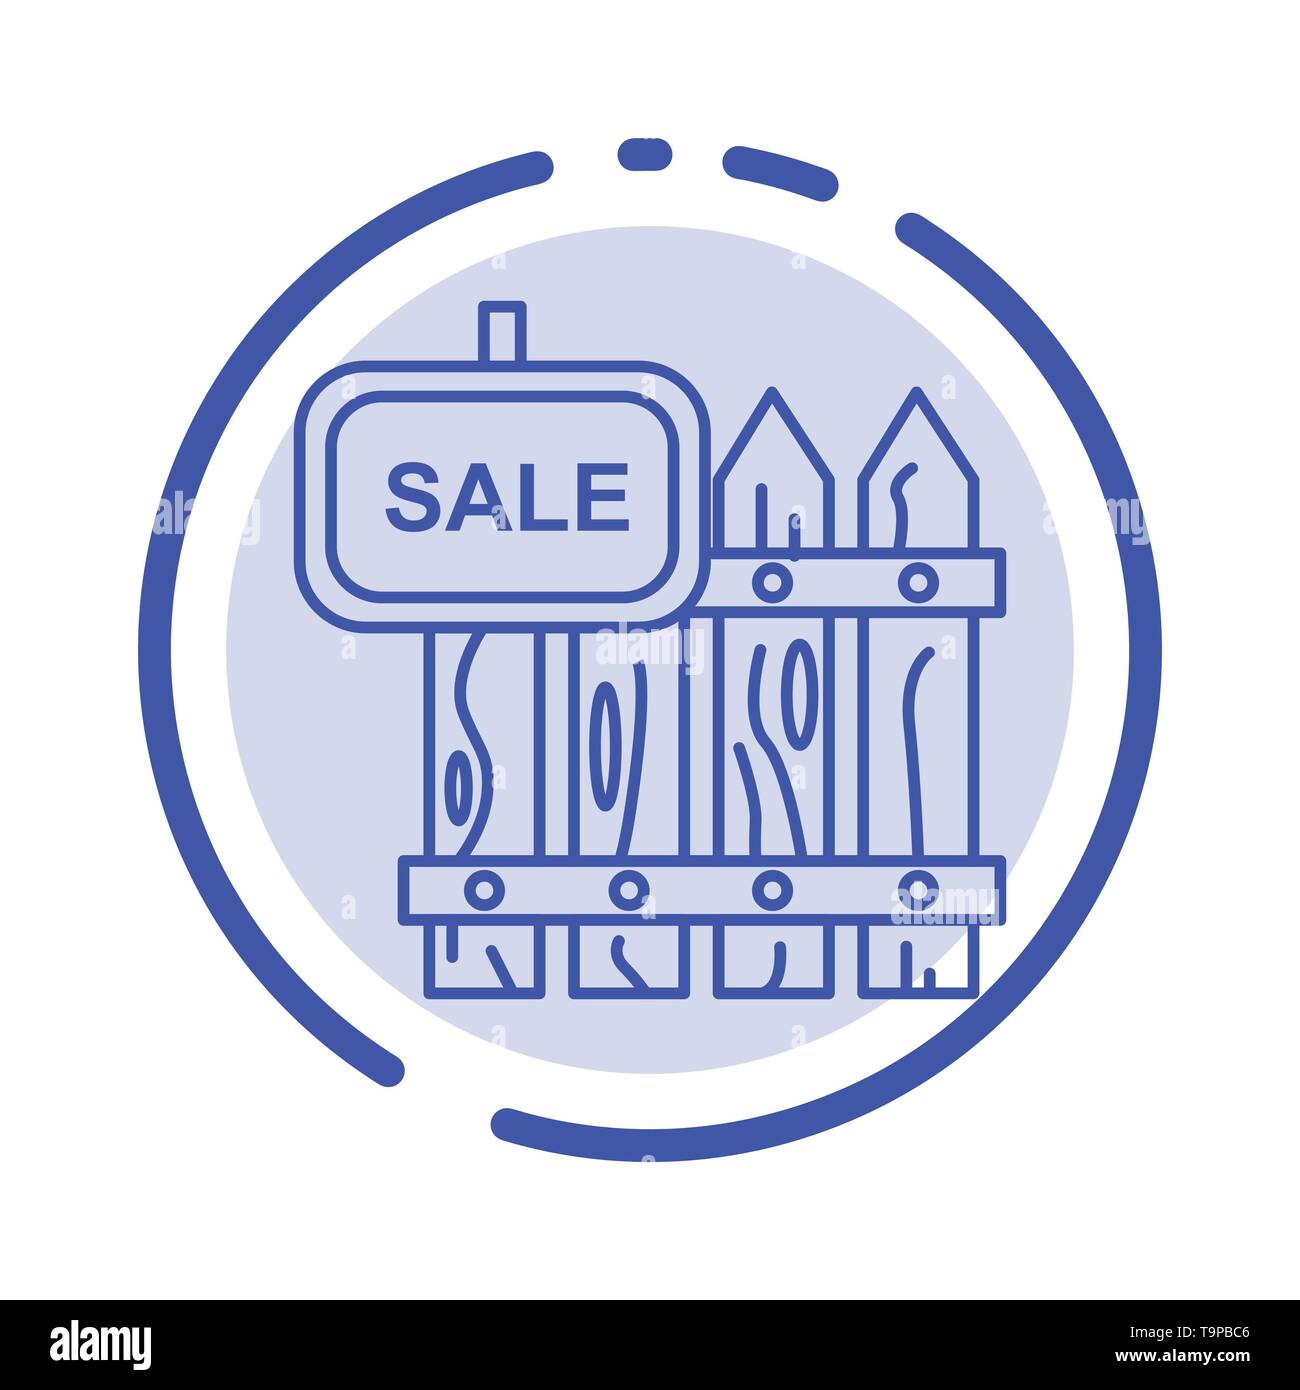 Fence, Wood, Realty, Sale, Garden, House Blue Dotted Line Line Icon Stock Vector